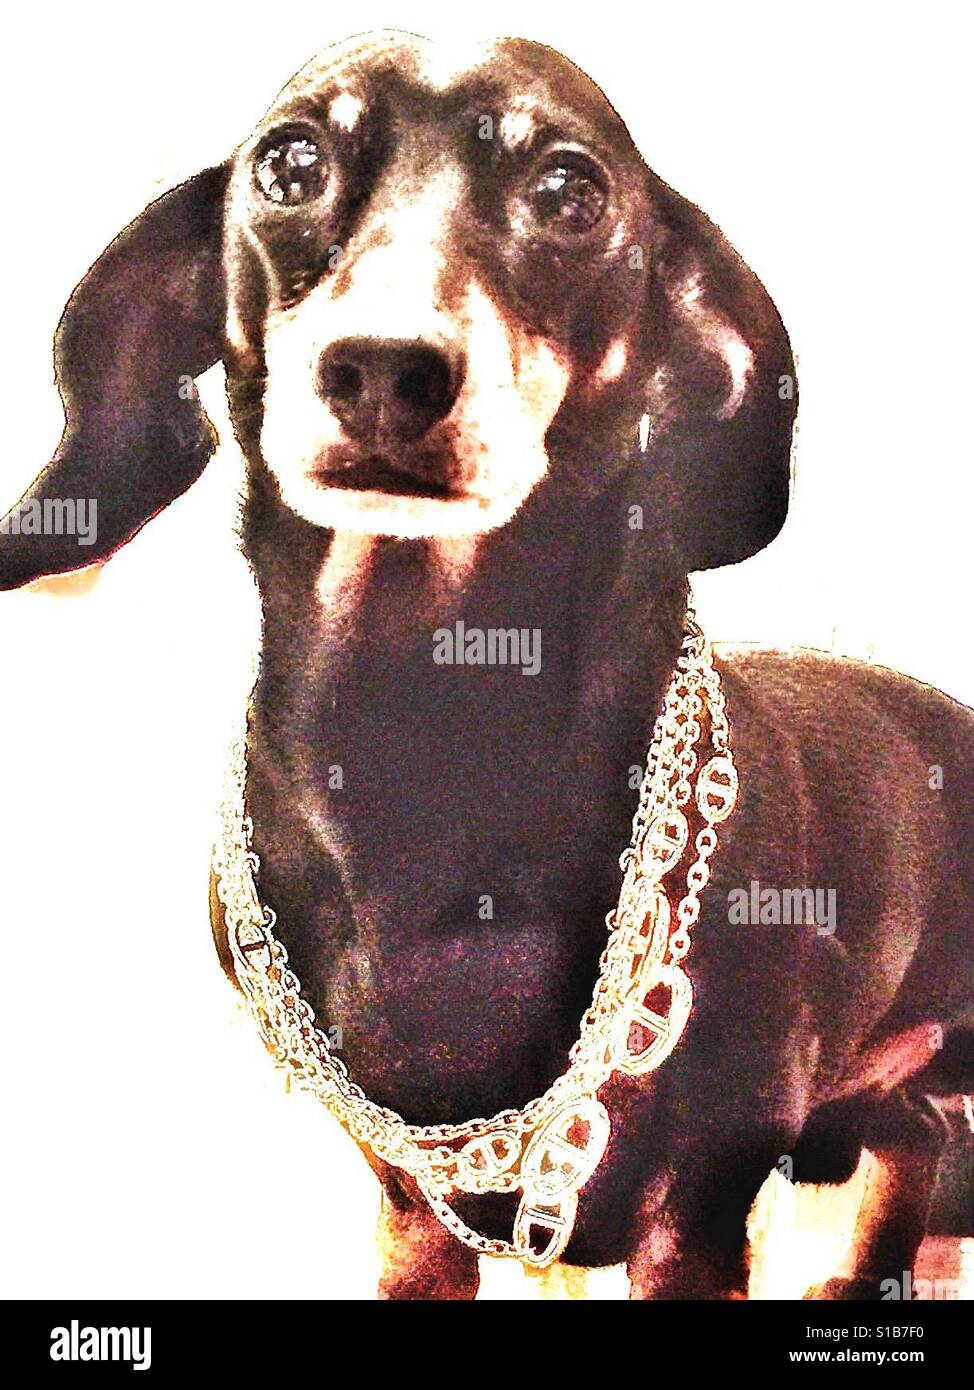 A small dog wearing a necklace. Stock Photo